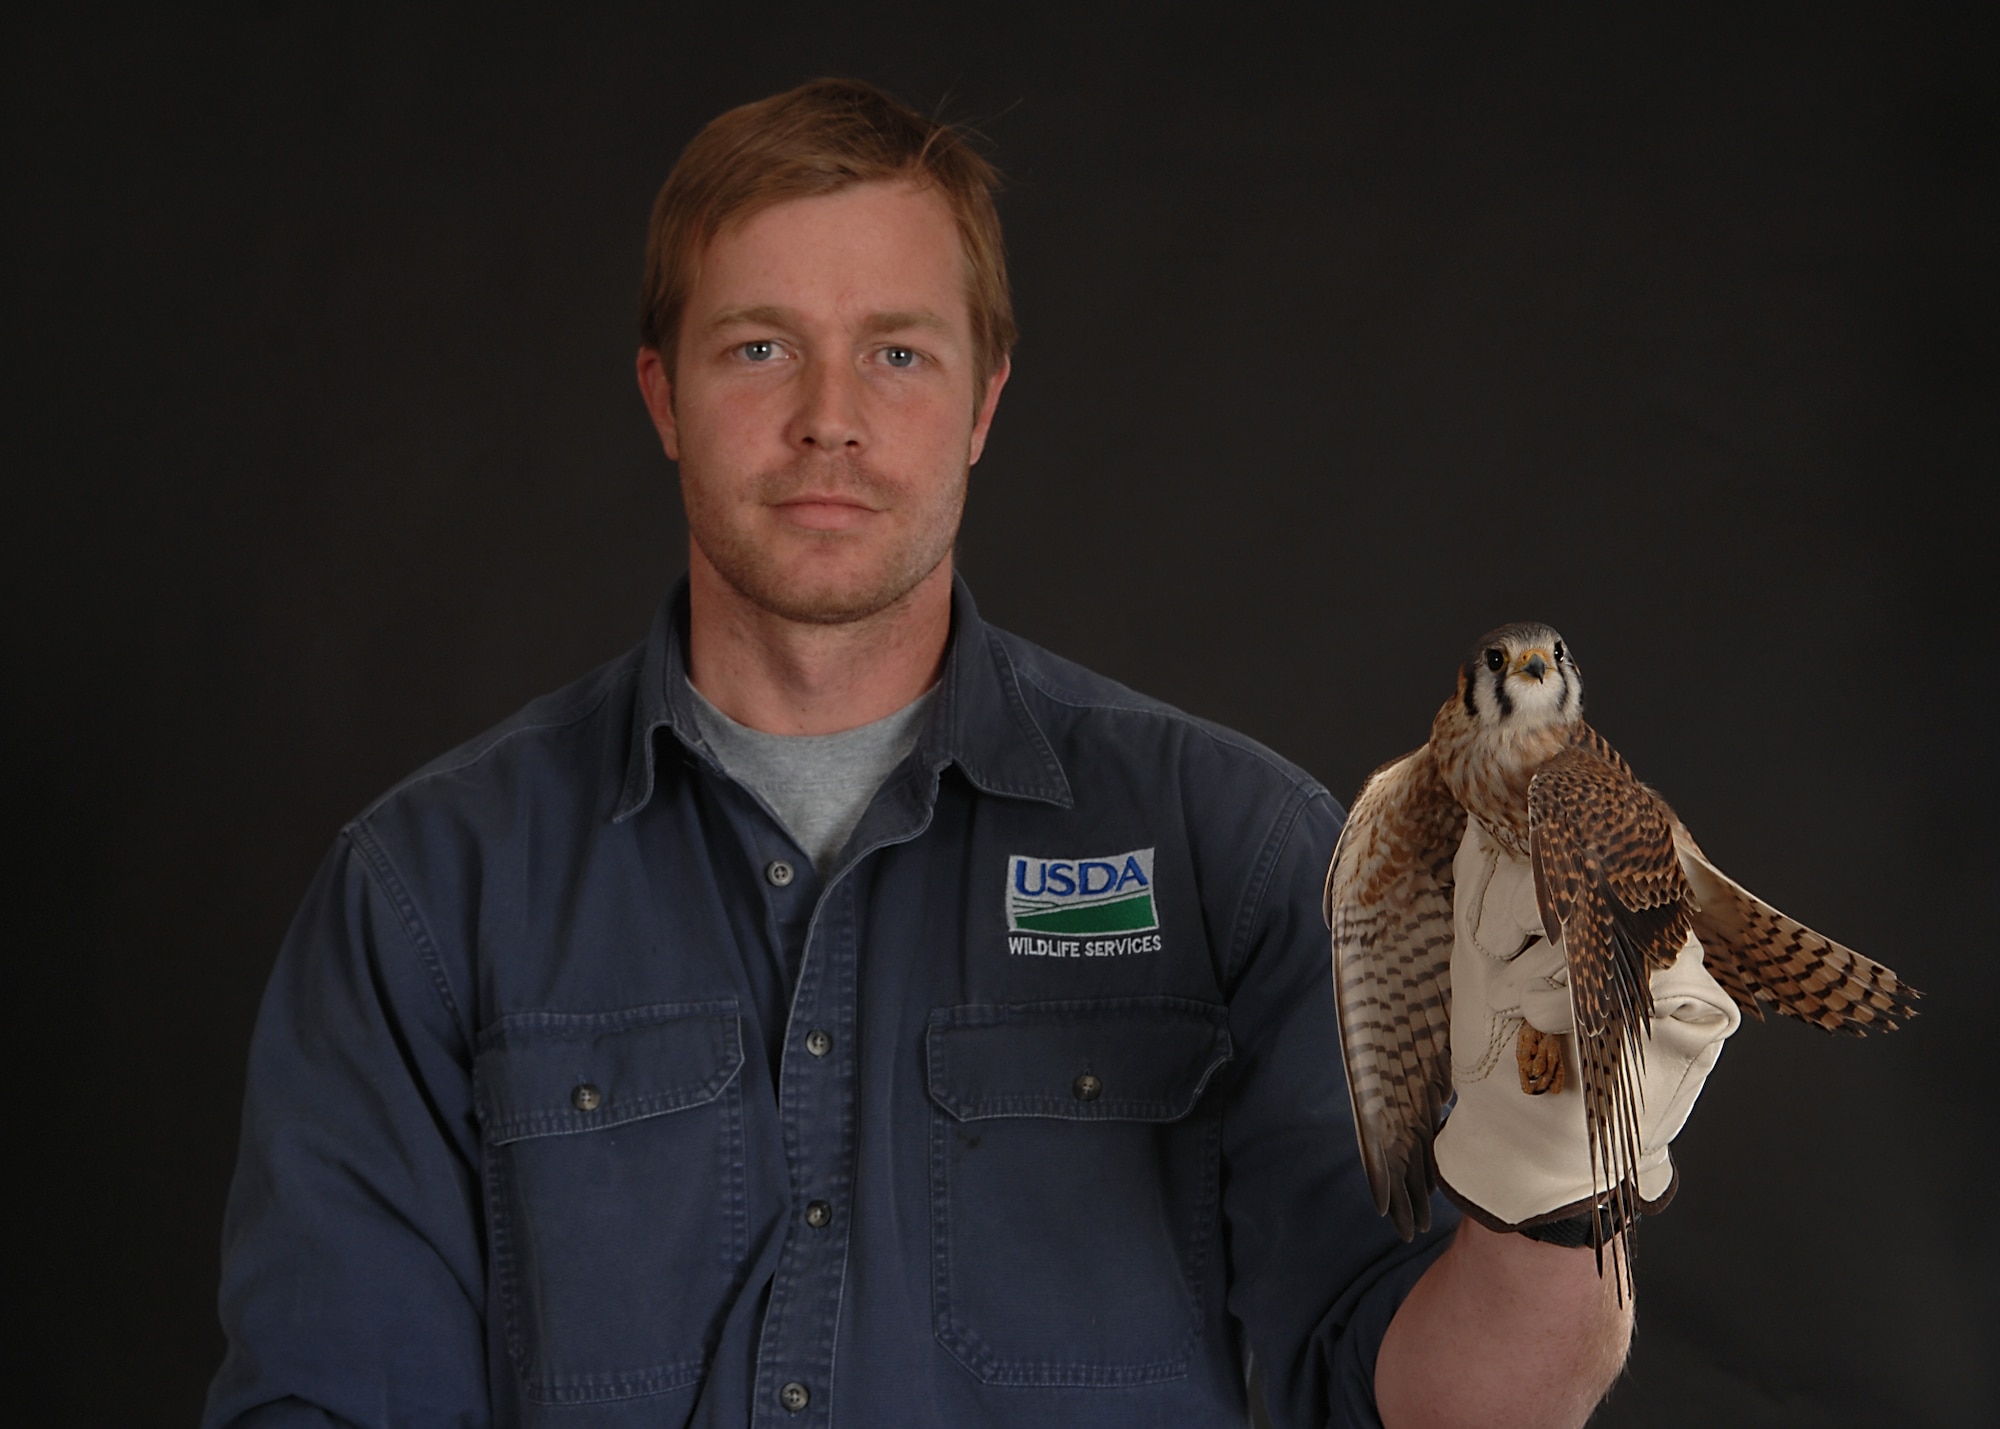 MOODY AIR FORCE BASE, Ga. -- Odin Stephens, wildlife biologist for the United States Department of Agriculture, catches an American kestrel Jan. 15 here. Stephens runs Moody's Bird Aircraft Strike Hazard program, keeping the flightline and airmen safe from bird strikes and other wildlife hazards. (U.S. Air Force photo by Airman 1st Class Brittany Barker) 